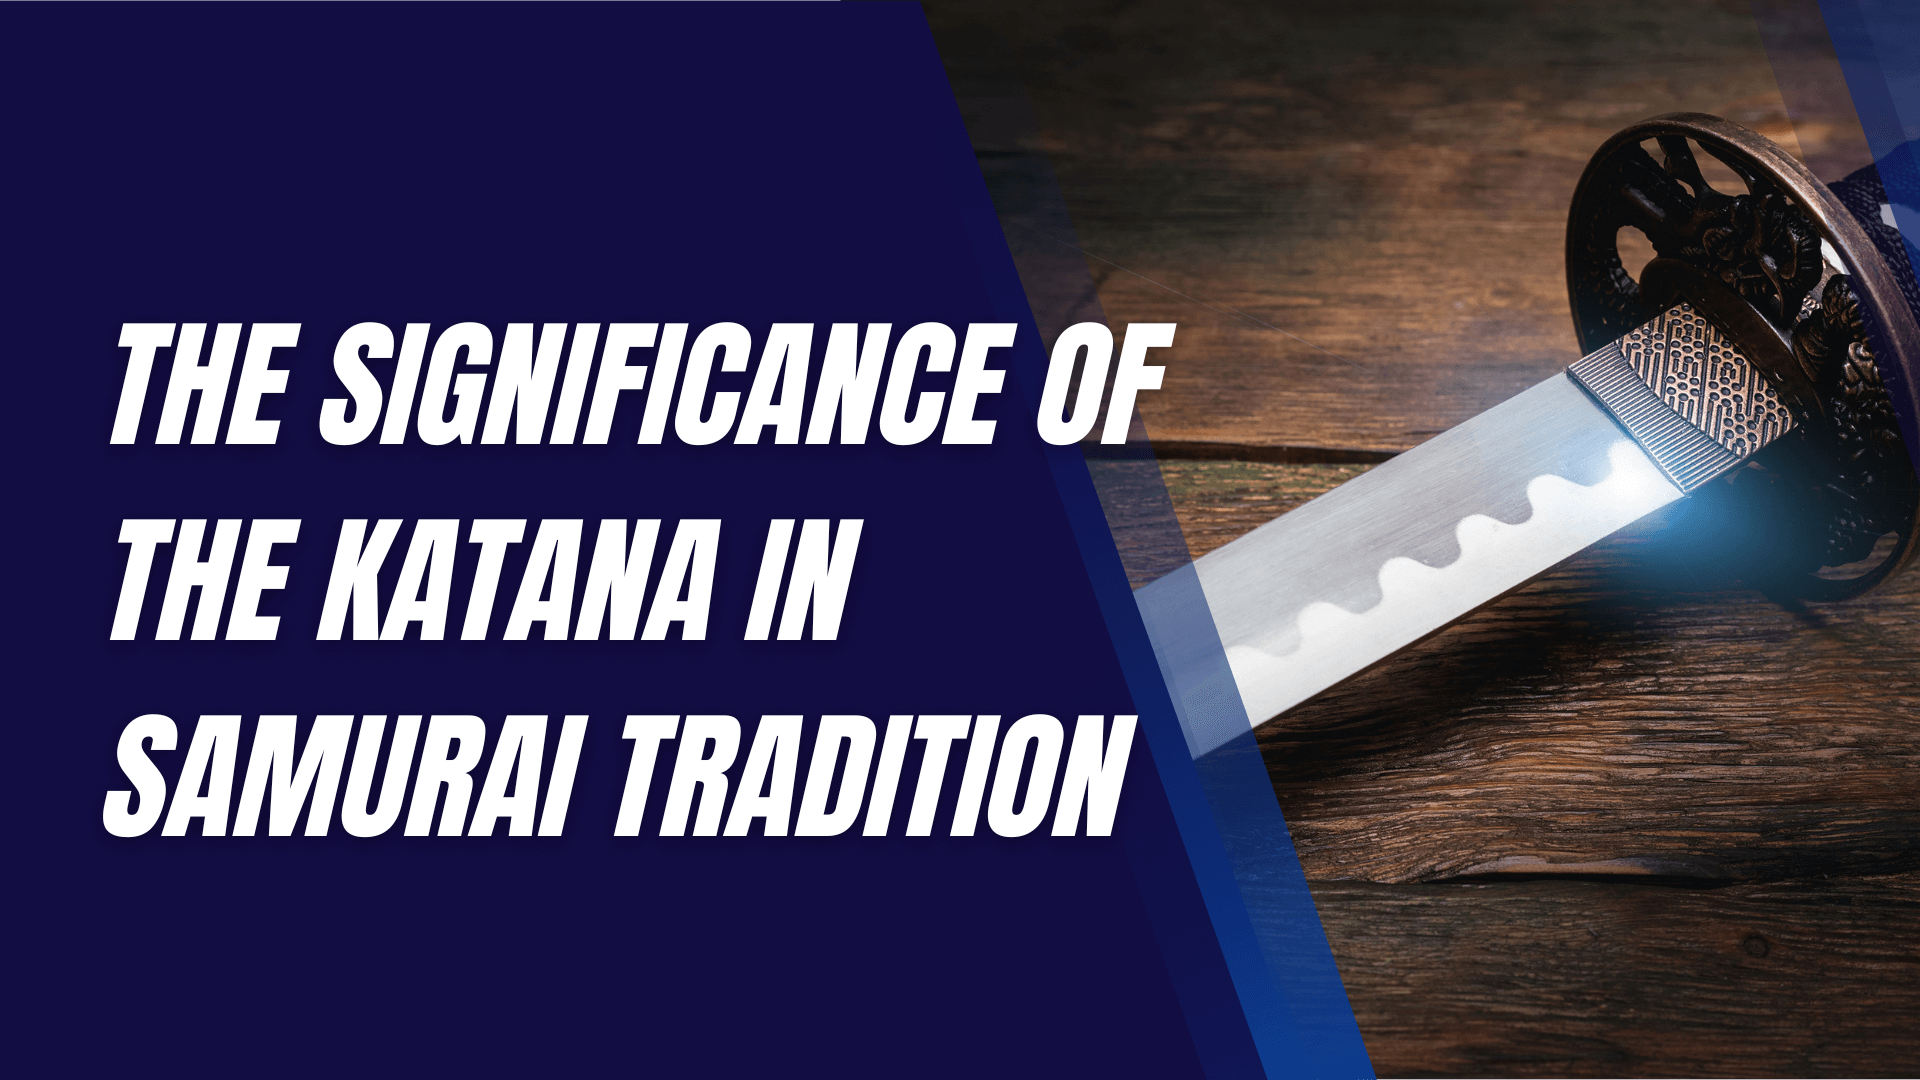 The Significance of the Katana in Samurai Tradition